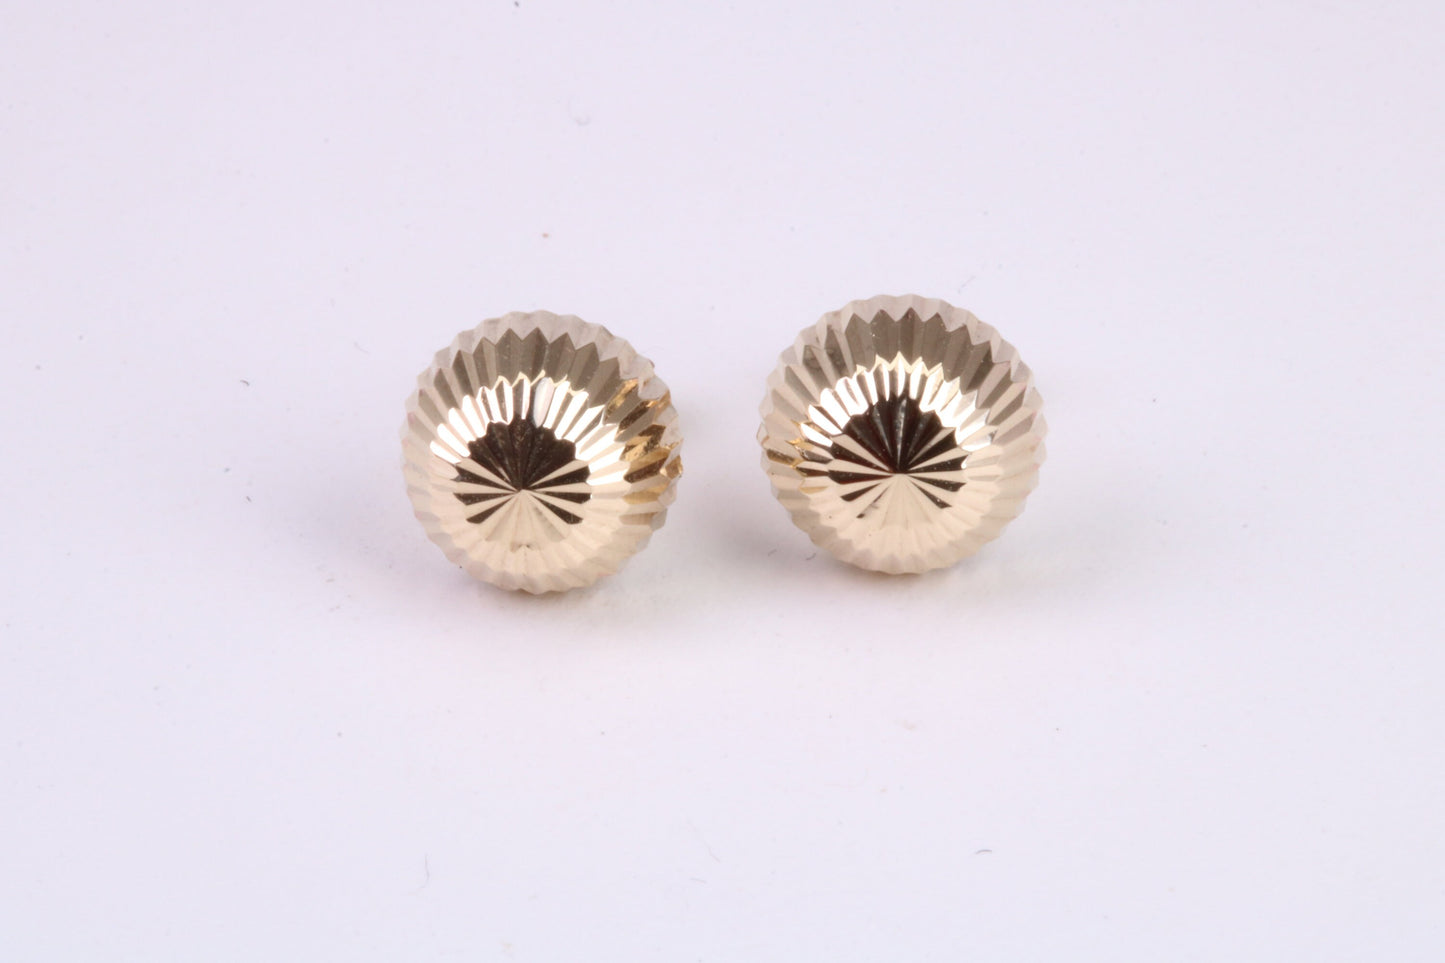 10 mm Round Diamond cut Domed Stud Earrings Made from Yellow Gold